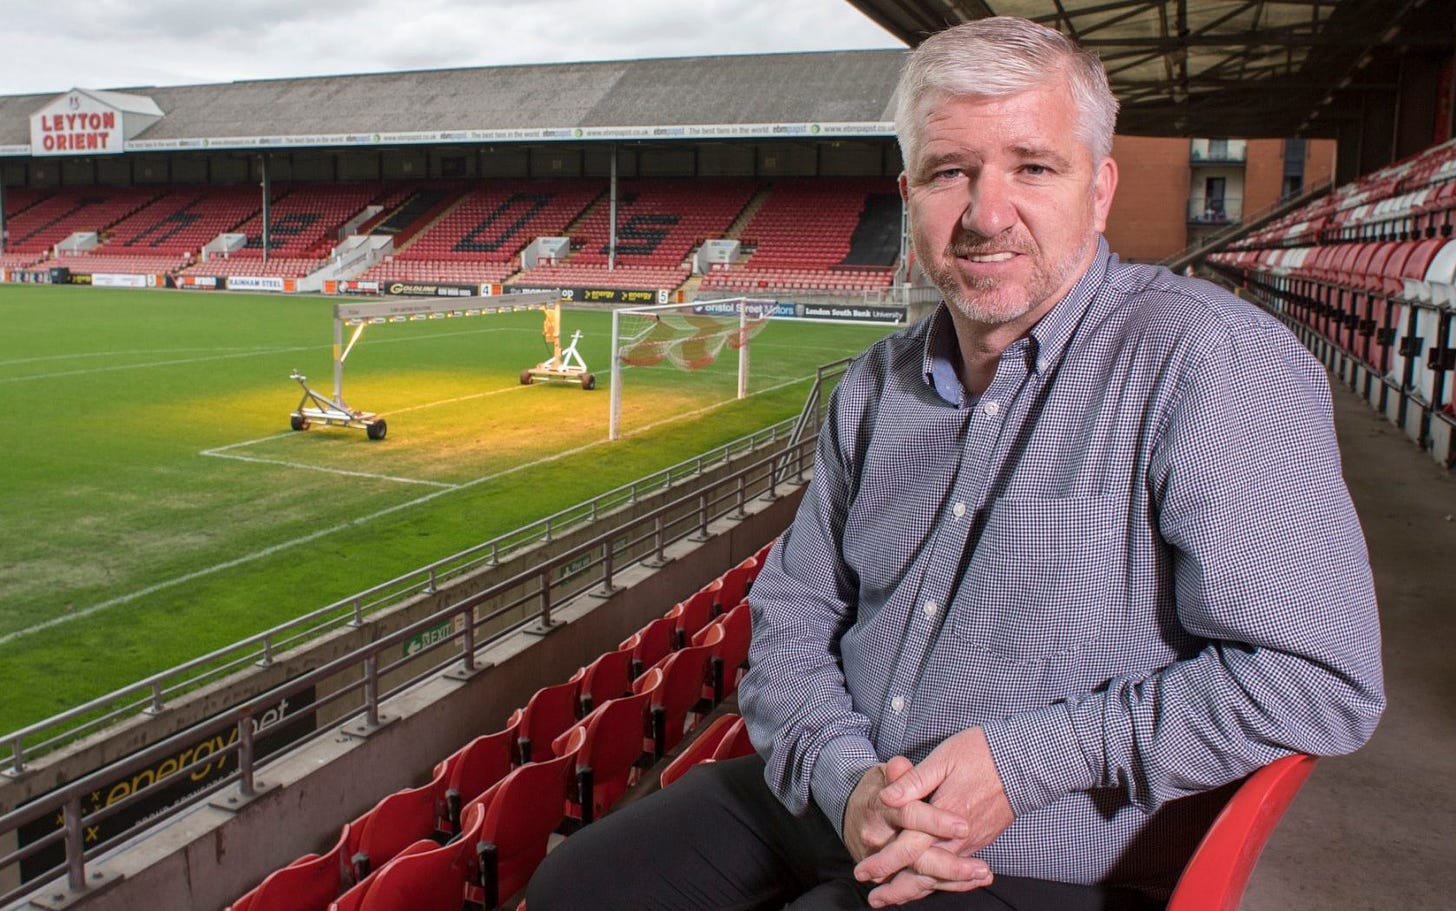 Martin Ling exclusive: I was worried my depression might scare people off  so Leyton Orient really feels like a second chance